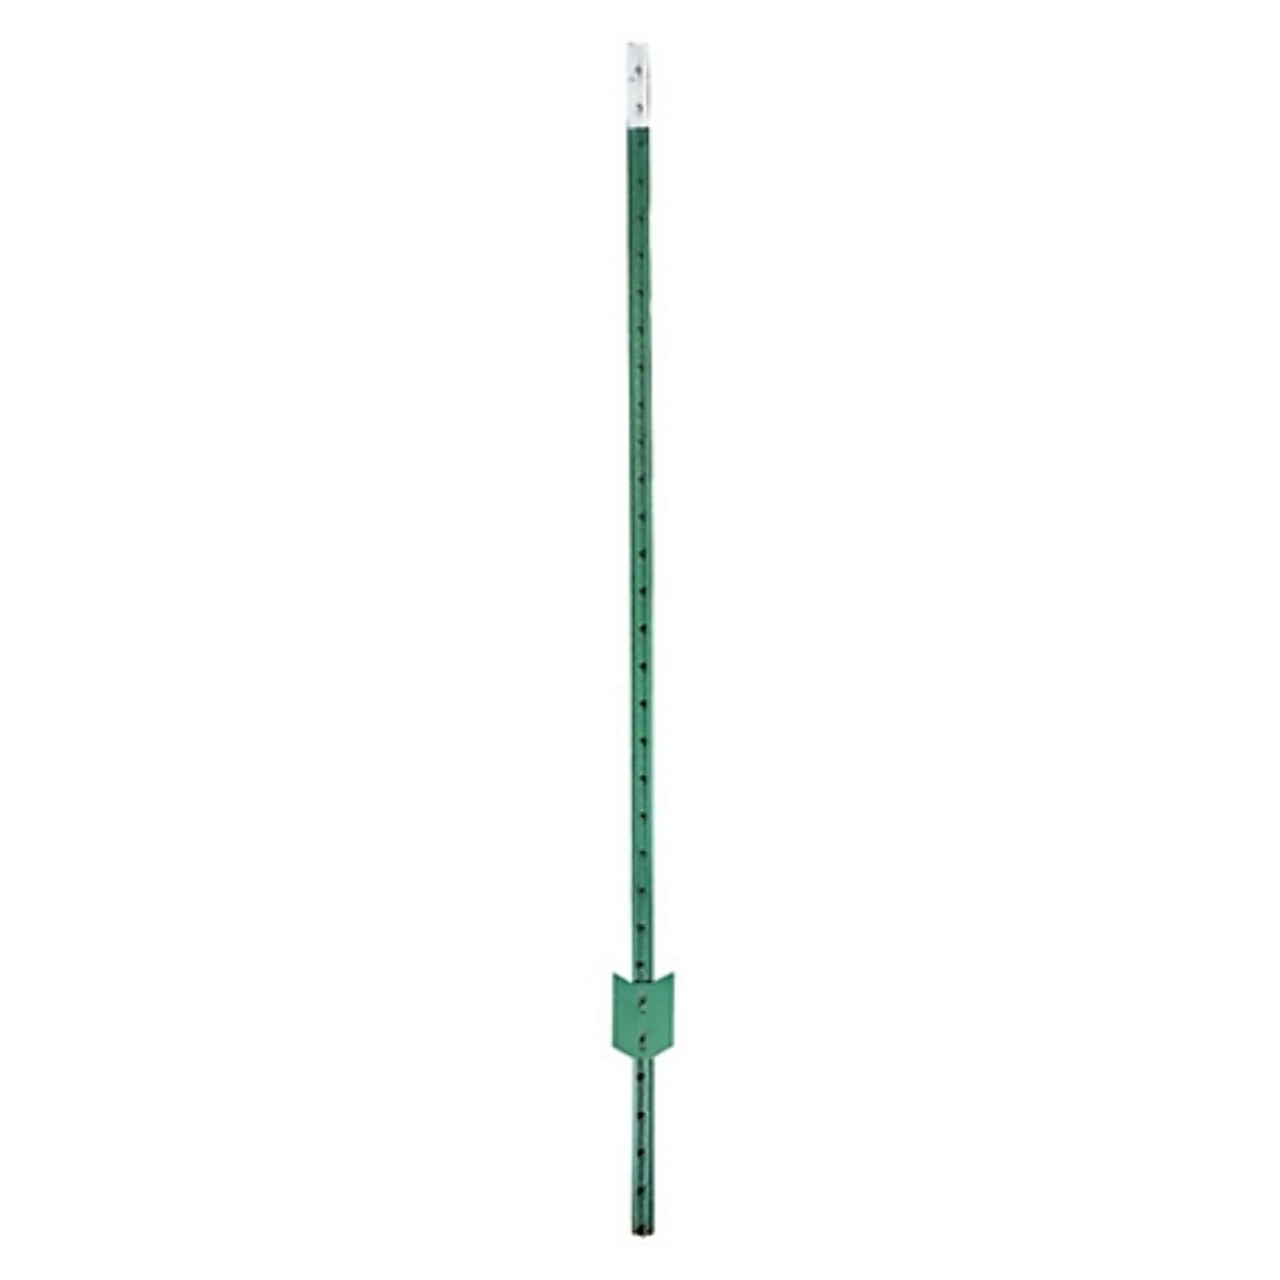 6-1/2 ft. Studded Fence T-Post, 1.25 lb./ft.